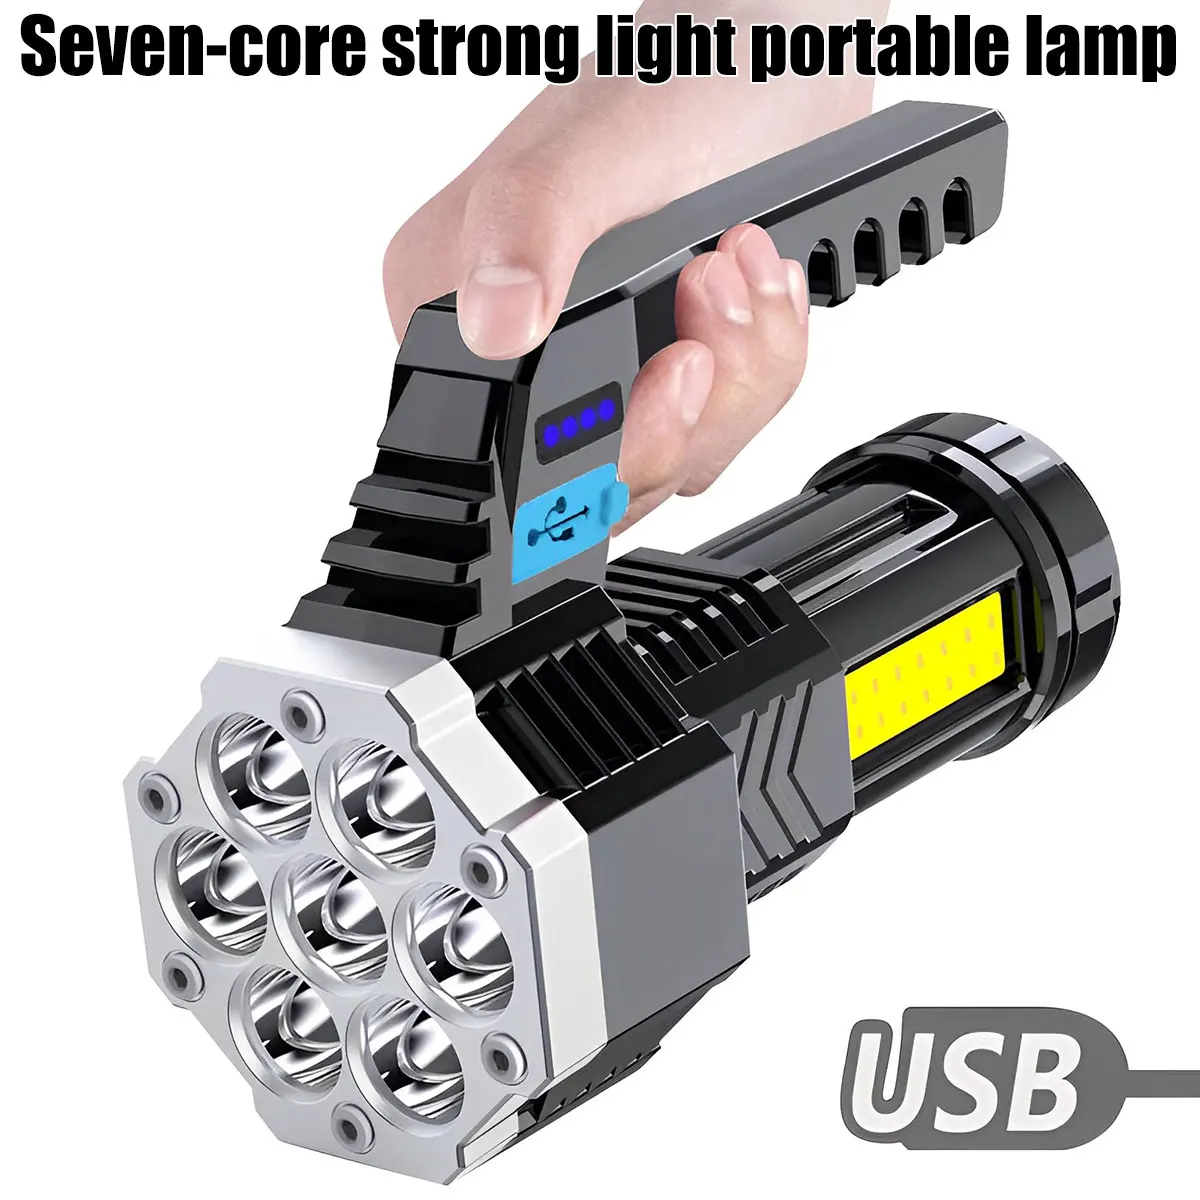 

High Power LED Flashlight Portable COB Spotlight USB Rechargeable 4 Gears Torch Light Handheld Searchlight Built-in Outdoor Lamp